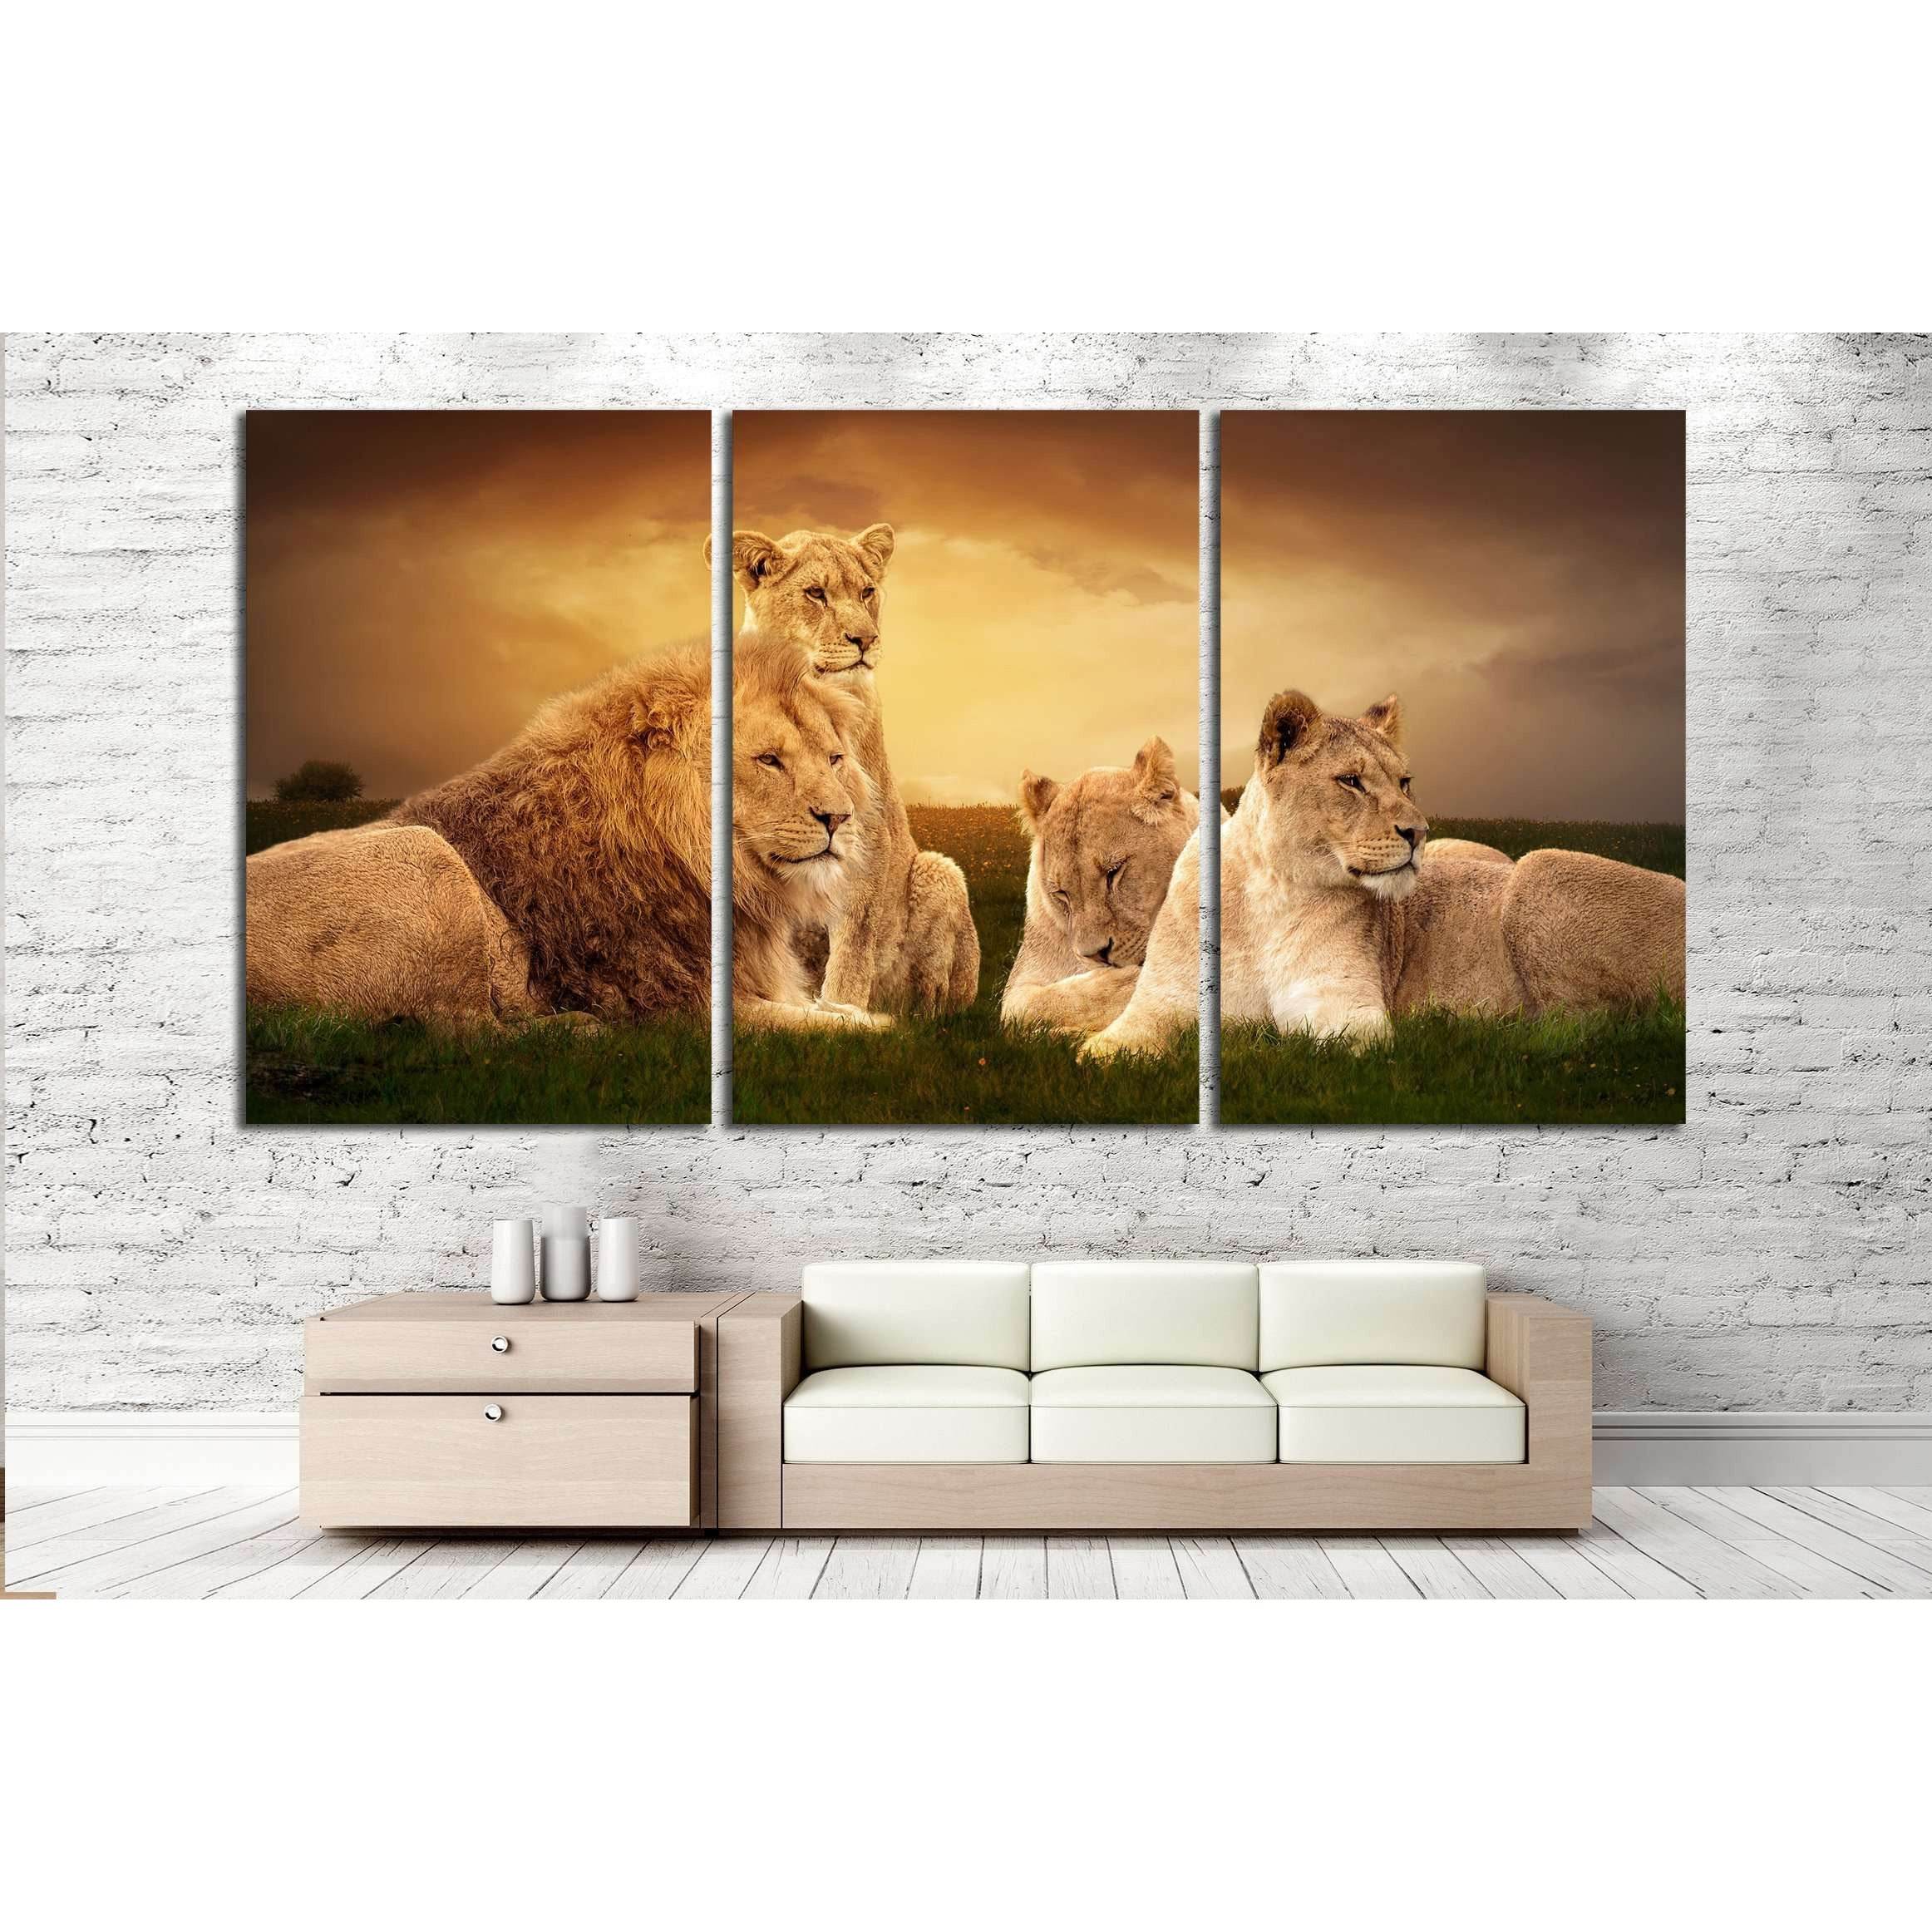 Lion Photography Wall Art PrintDecorate your walls with a stunning Lion Canvas Art Print from the world's largest art gallery. Choose from thousands of Lion artworks with various sizing options. Choose your perfect art print to complete your home decorati